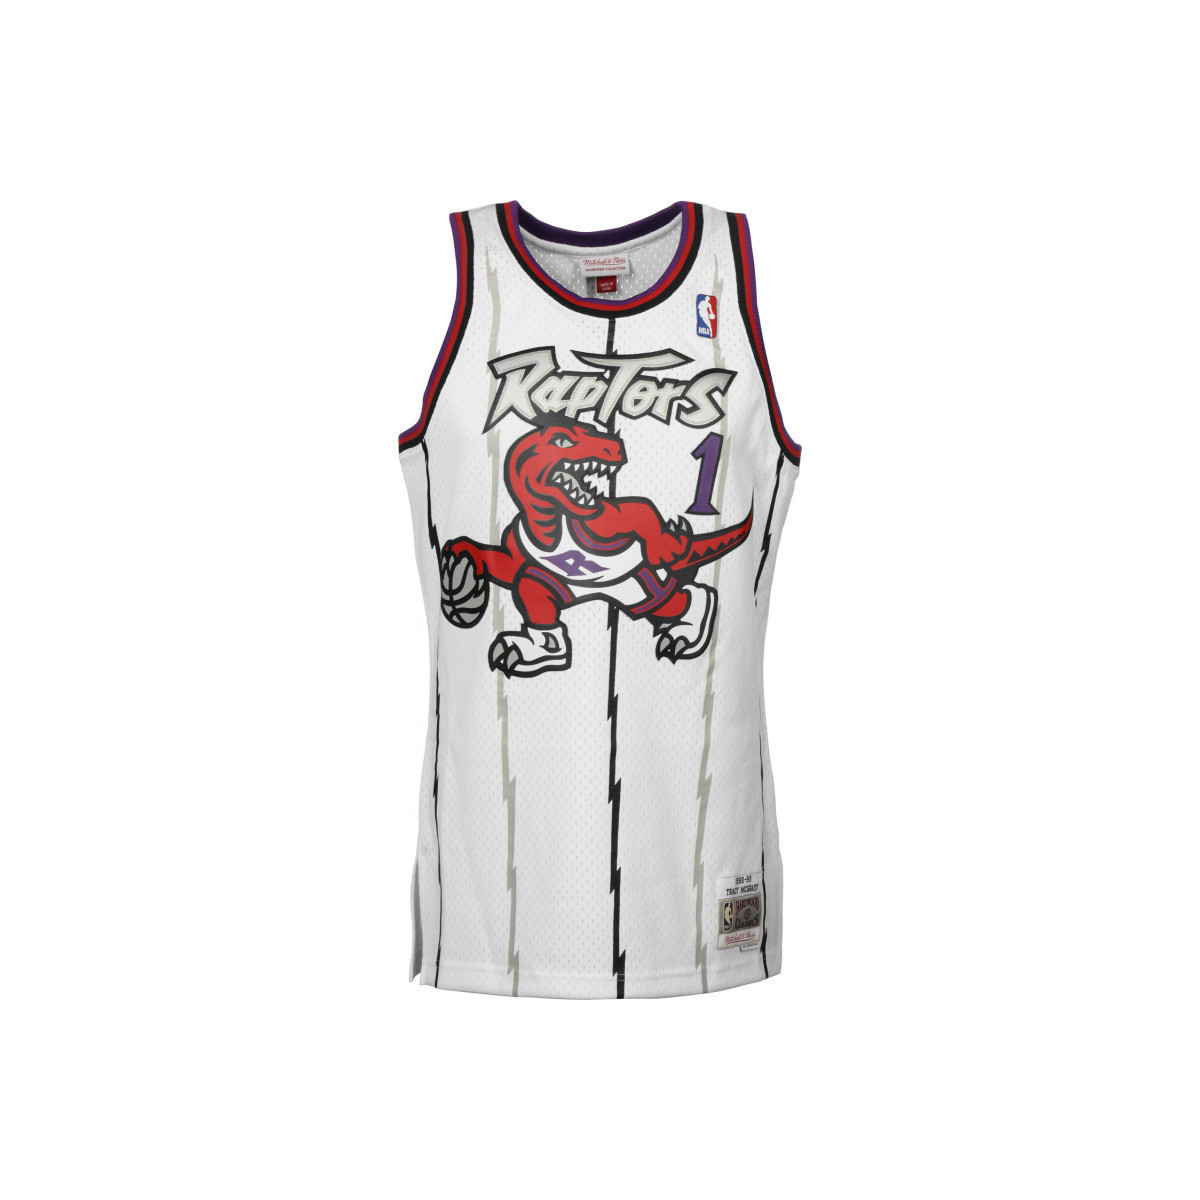 Vêtements T-shirts manches courtes Mitchell And Ness Maillot NBA Tracy Mcgrady Toro Multicolore